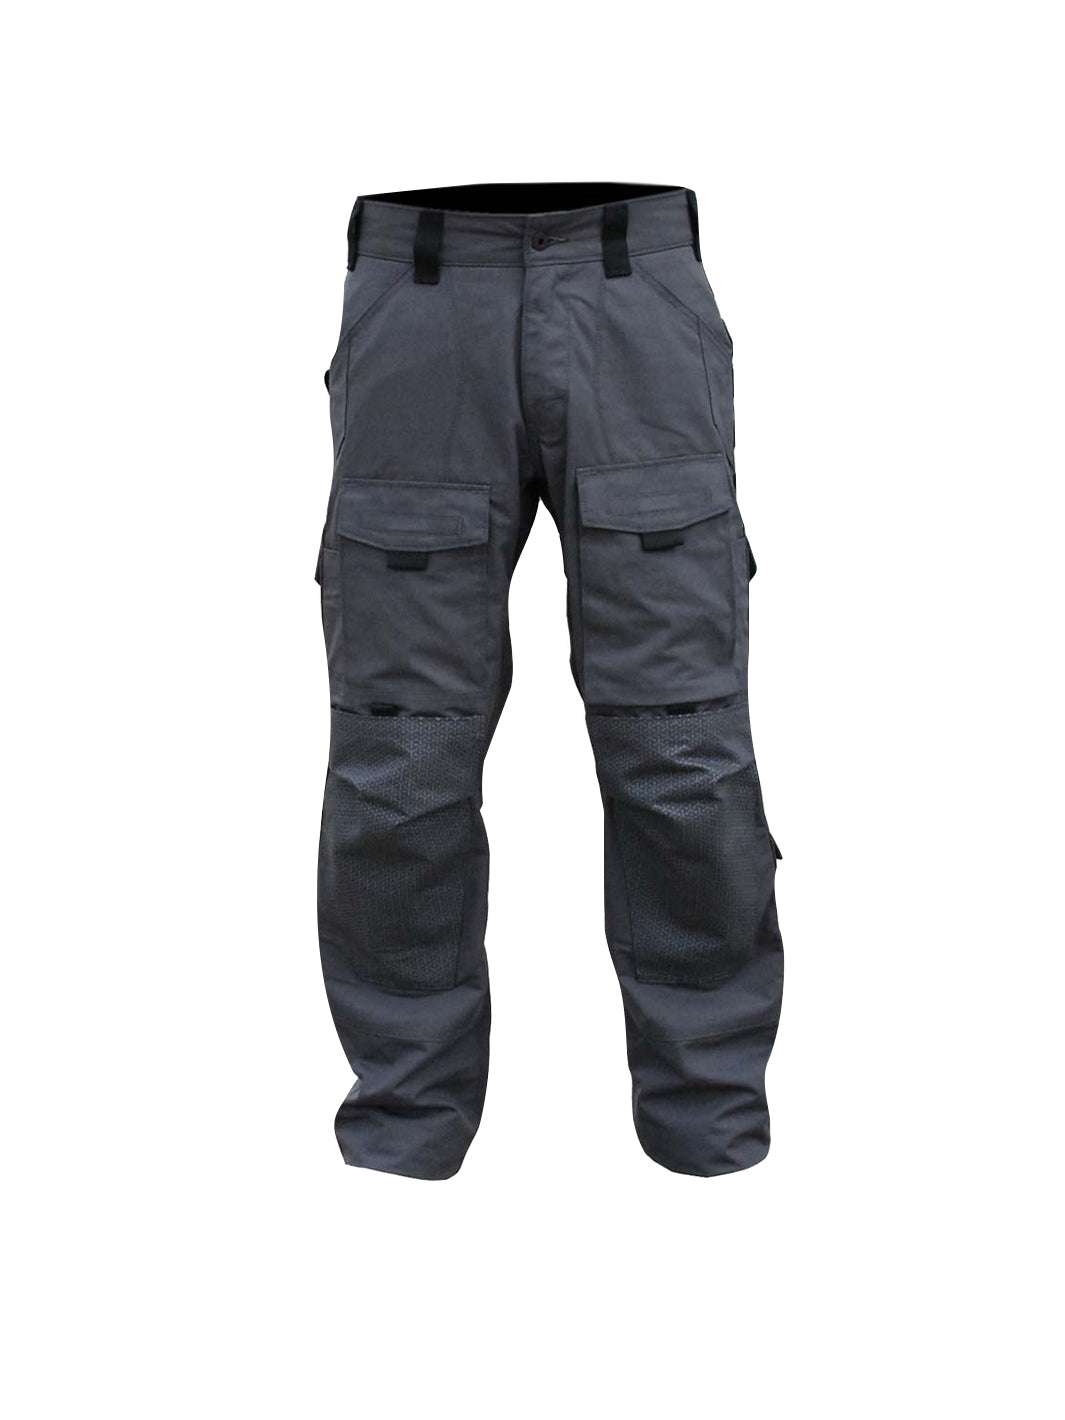 Men's Urban Pro Stretch Tactical Pants | FreeSoldier